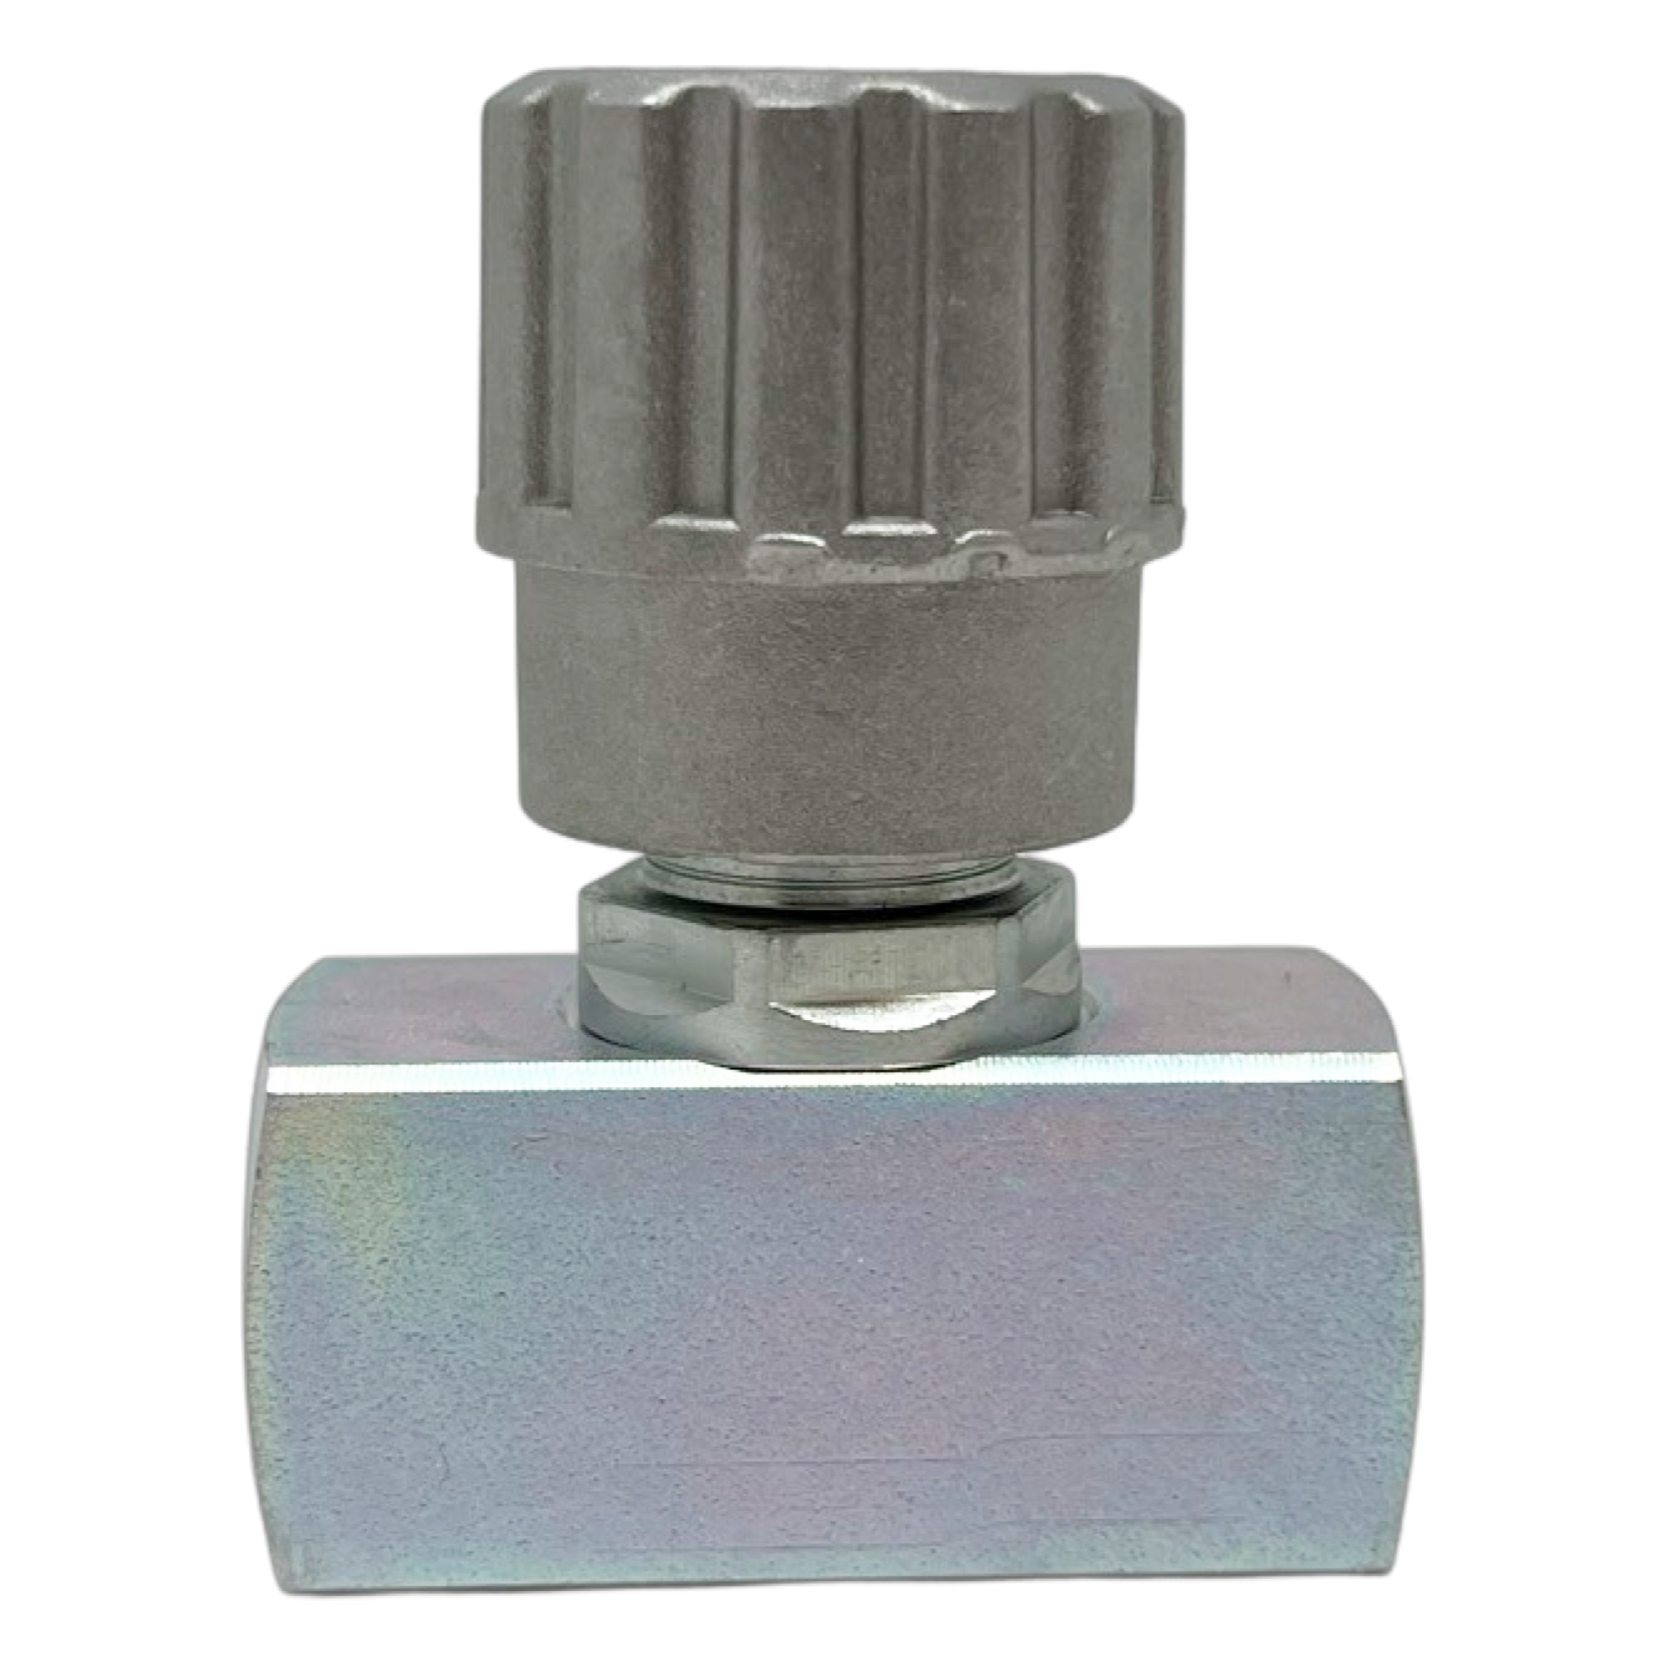 NN3/8-1 : AFP Needle Valve, 3/8" NPT, 5700psi and 8GPM Flow Rated, Steel